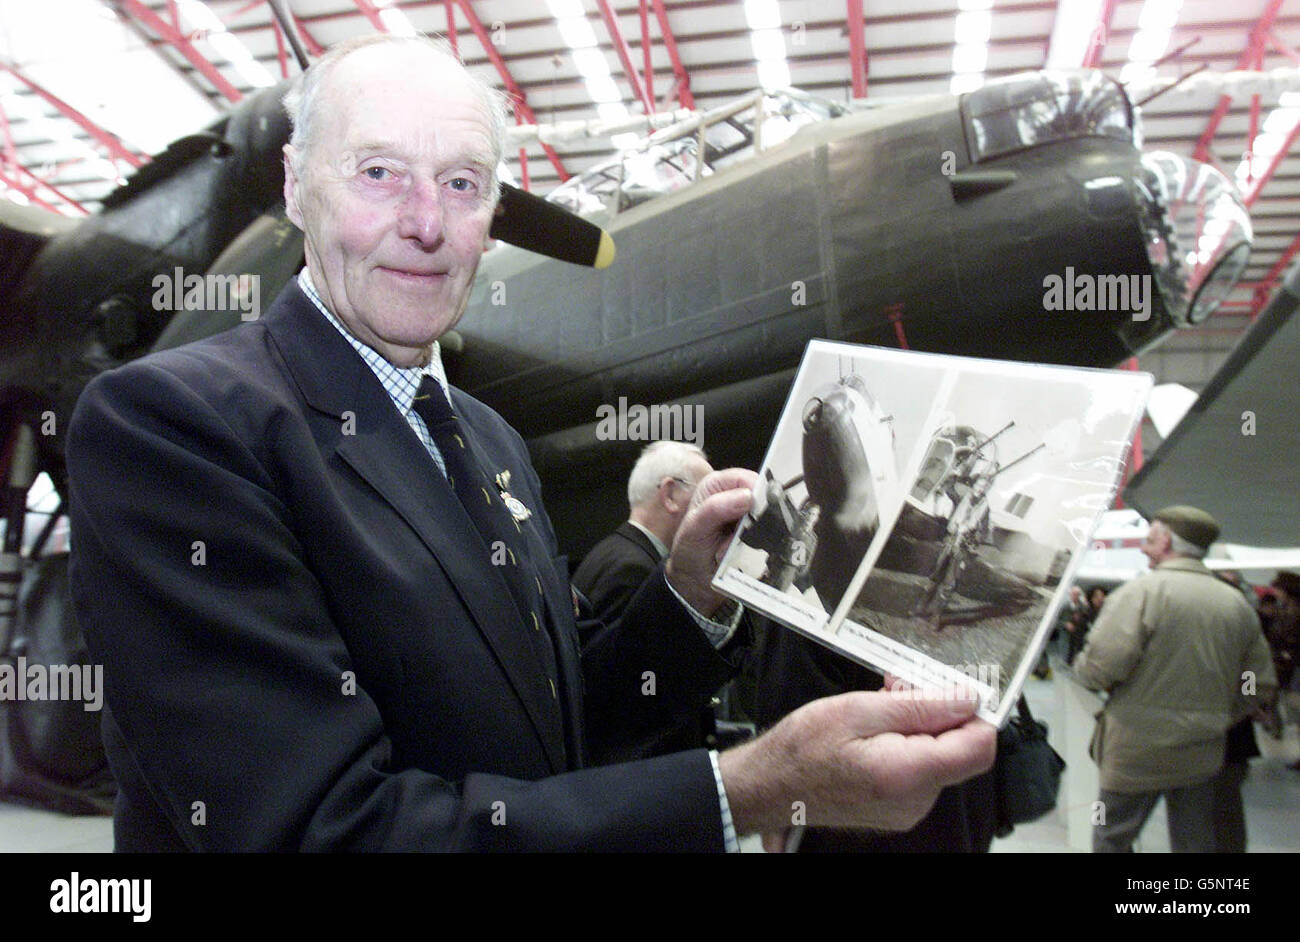 Jim McGillivray, Flight Sgt. in the 115 Squadron, with pictures of himself in front of a Lancaster during the war, during celebrations to mark the 60th anniversary of the plane's Second World War missions, at Duxford Air Museum, Cambridgeshire. * RAF veterans criticised the Ministry of Defence's failure to recognise the achievements of Bomber Command, feeling that campaign medals should have been awarded to the crews despite the controversy caused by the number of civilians killed during the bombing raids over Germany, which are seen as a vital contribution to the Allied victory. Stock Photo